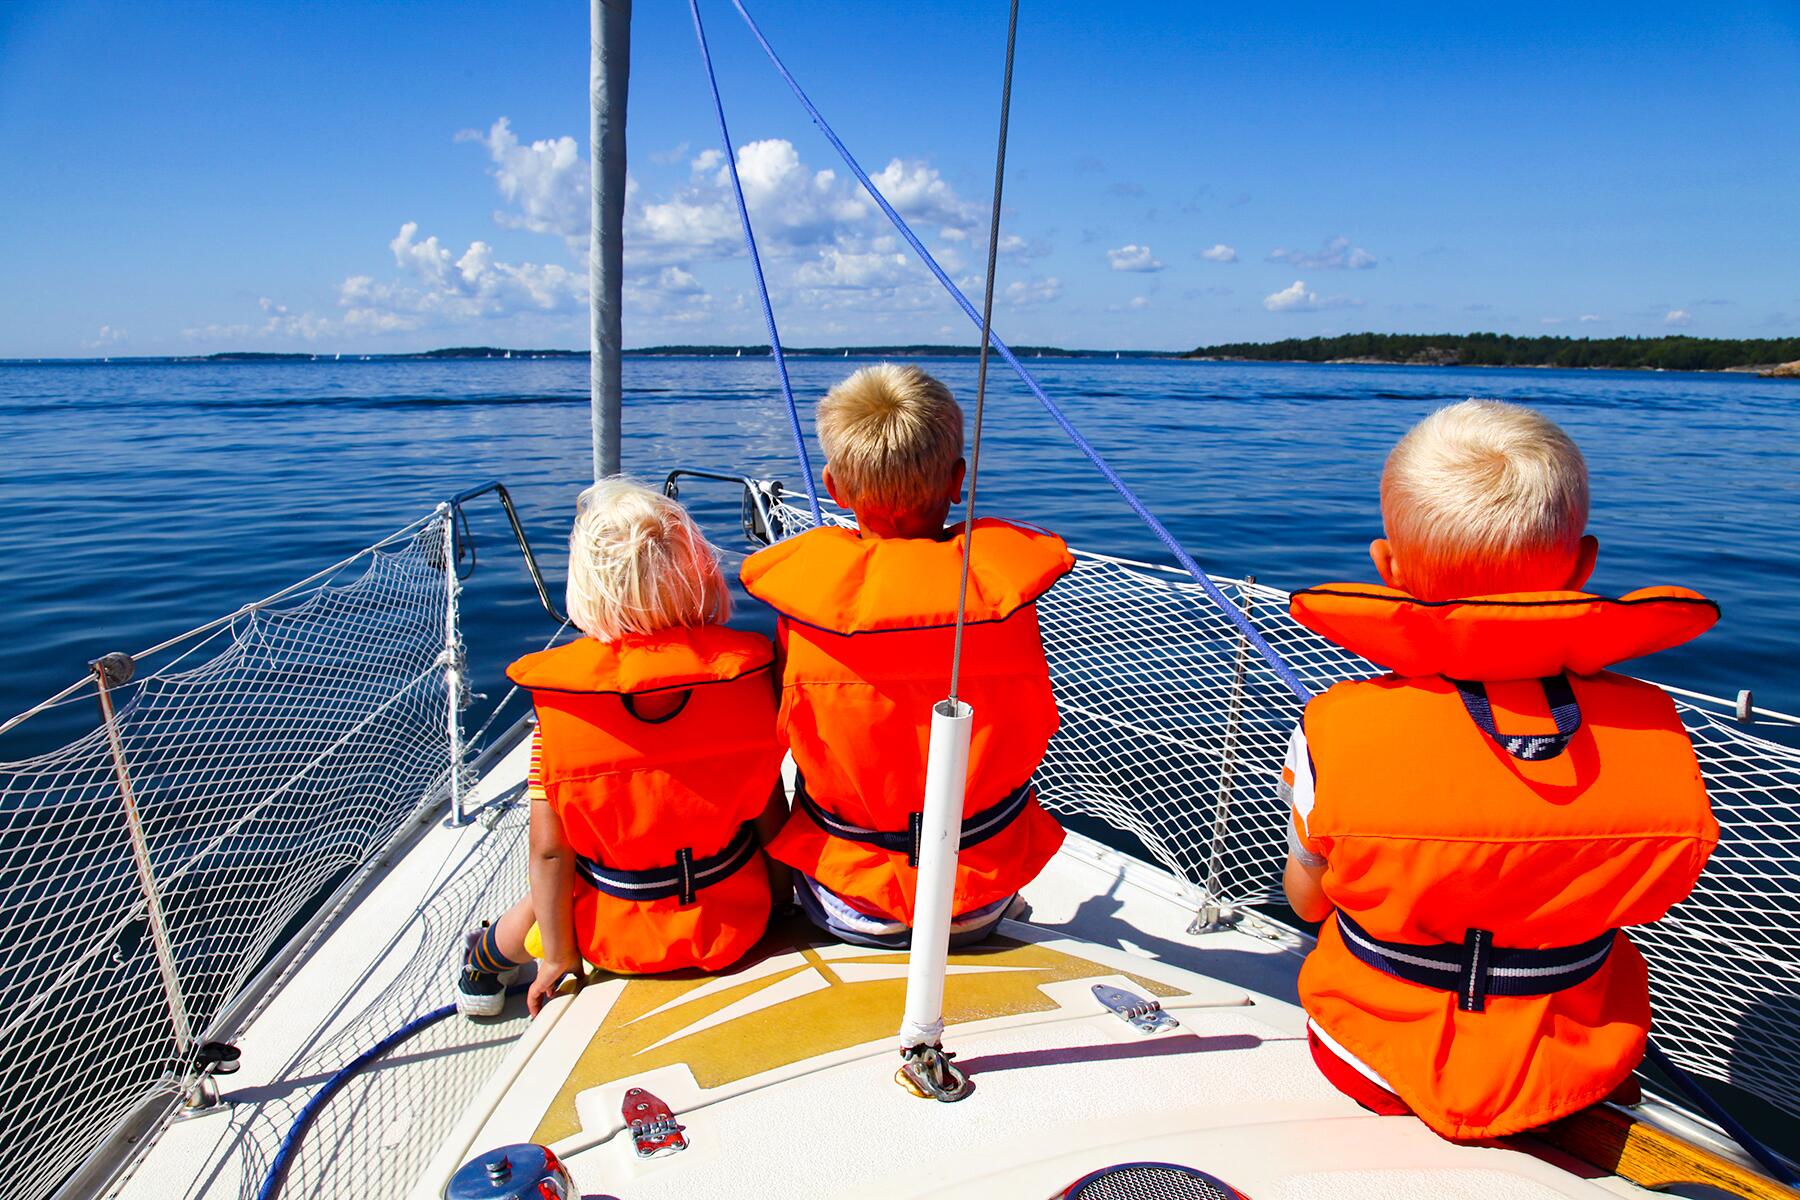 Crucial Guidelines to Ensure Safety on Your Upcoming Boating Adventure